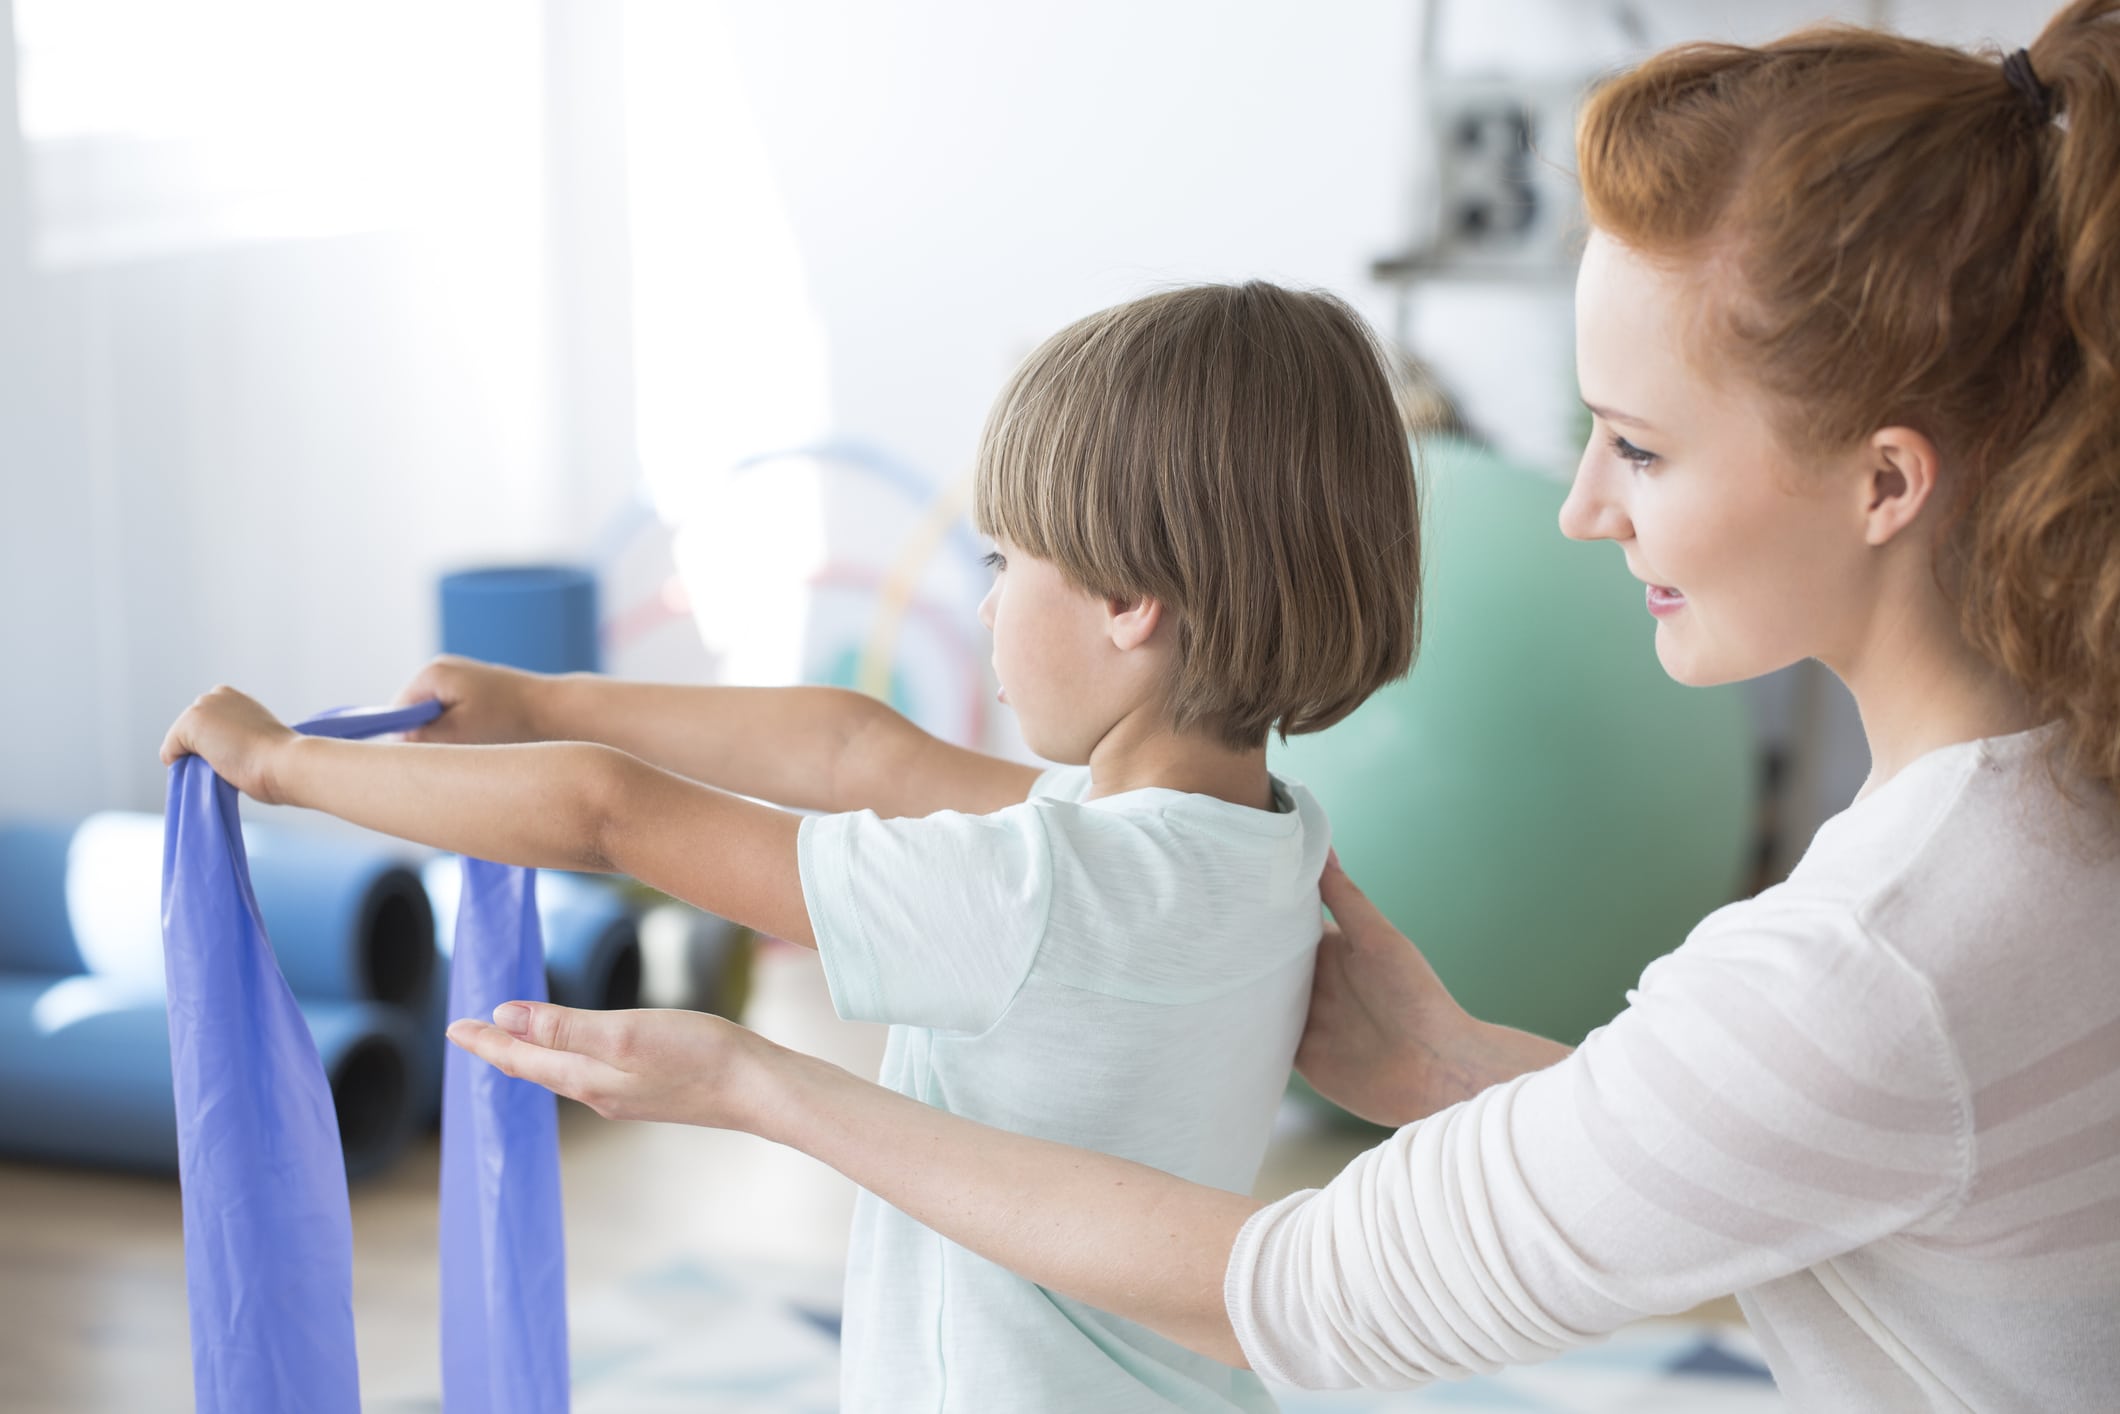 Pediatric physical therapist helping a child with activities during early intervention physical therapy